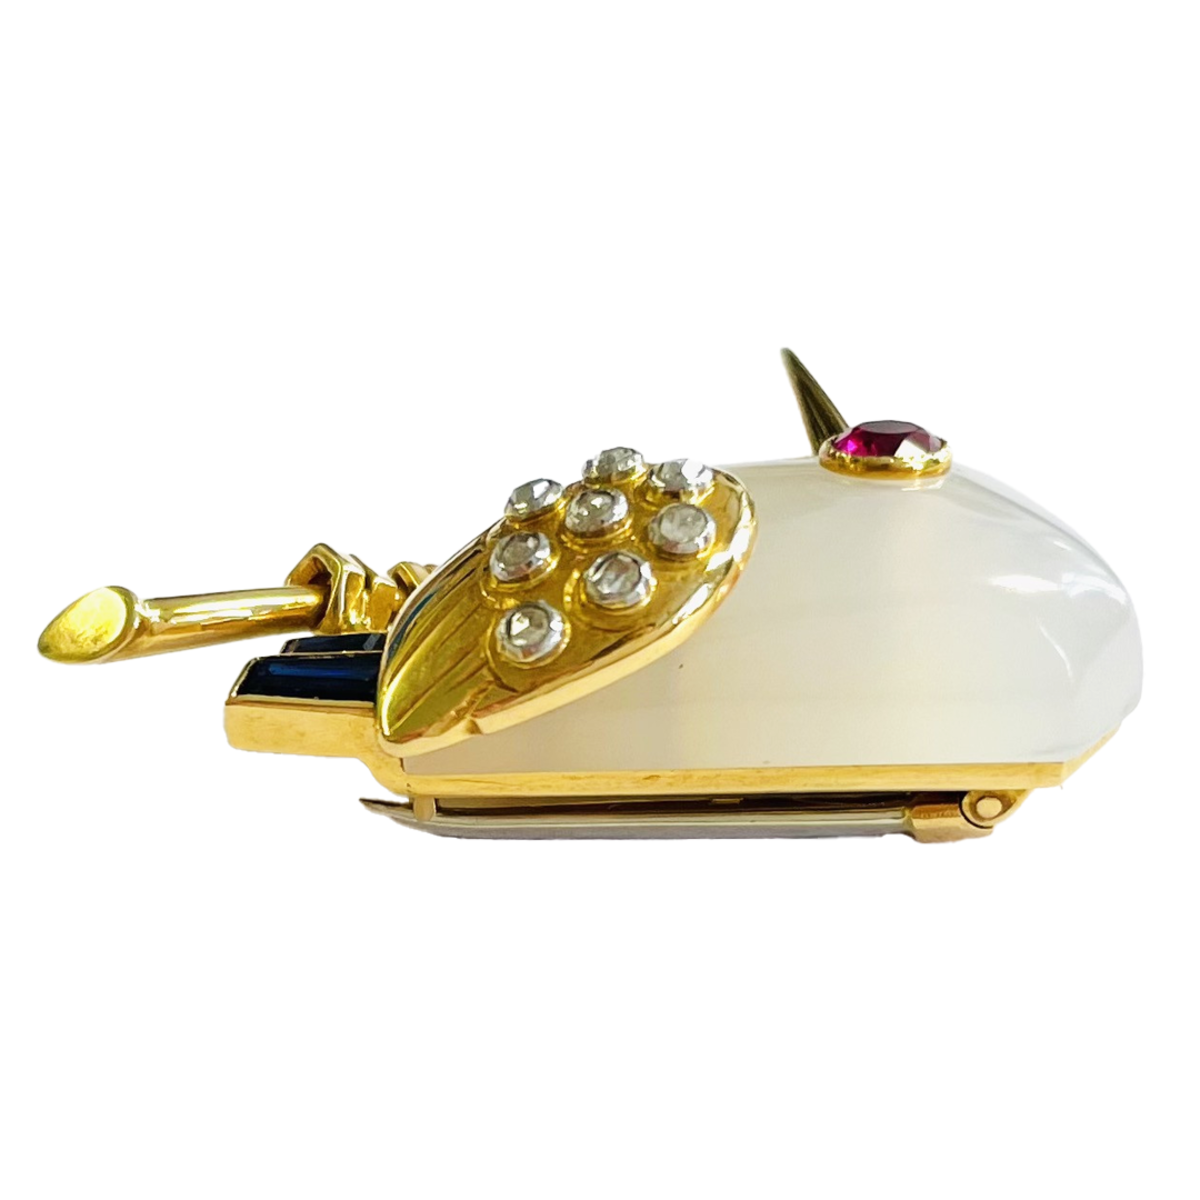 Cartier 1950s 18KT Yellow Gold Agate, Diamond, Ruby & Sapphire Kingfisher Bird Brooch profile view